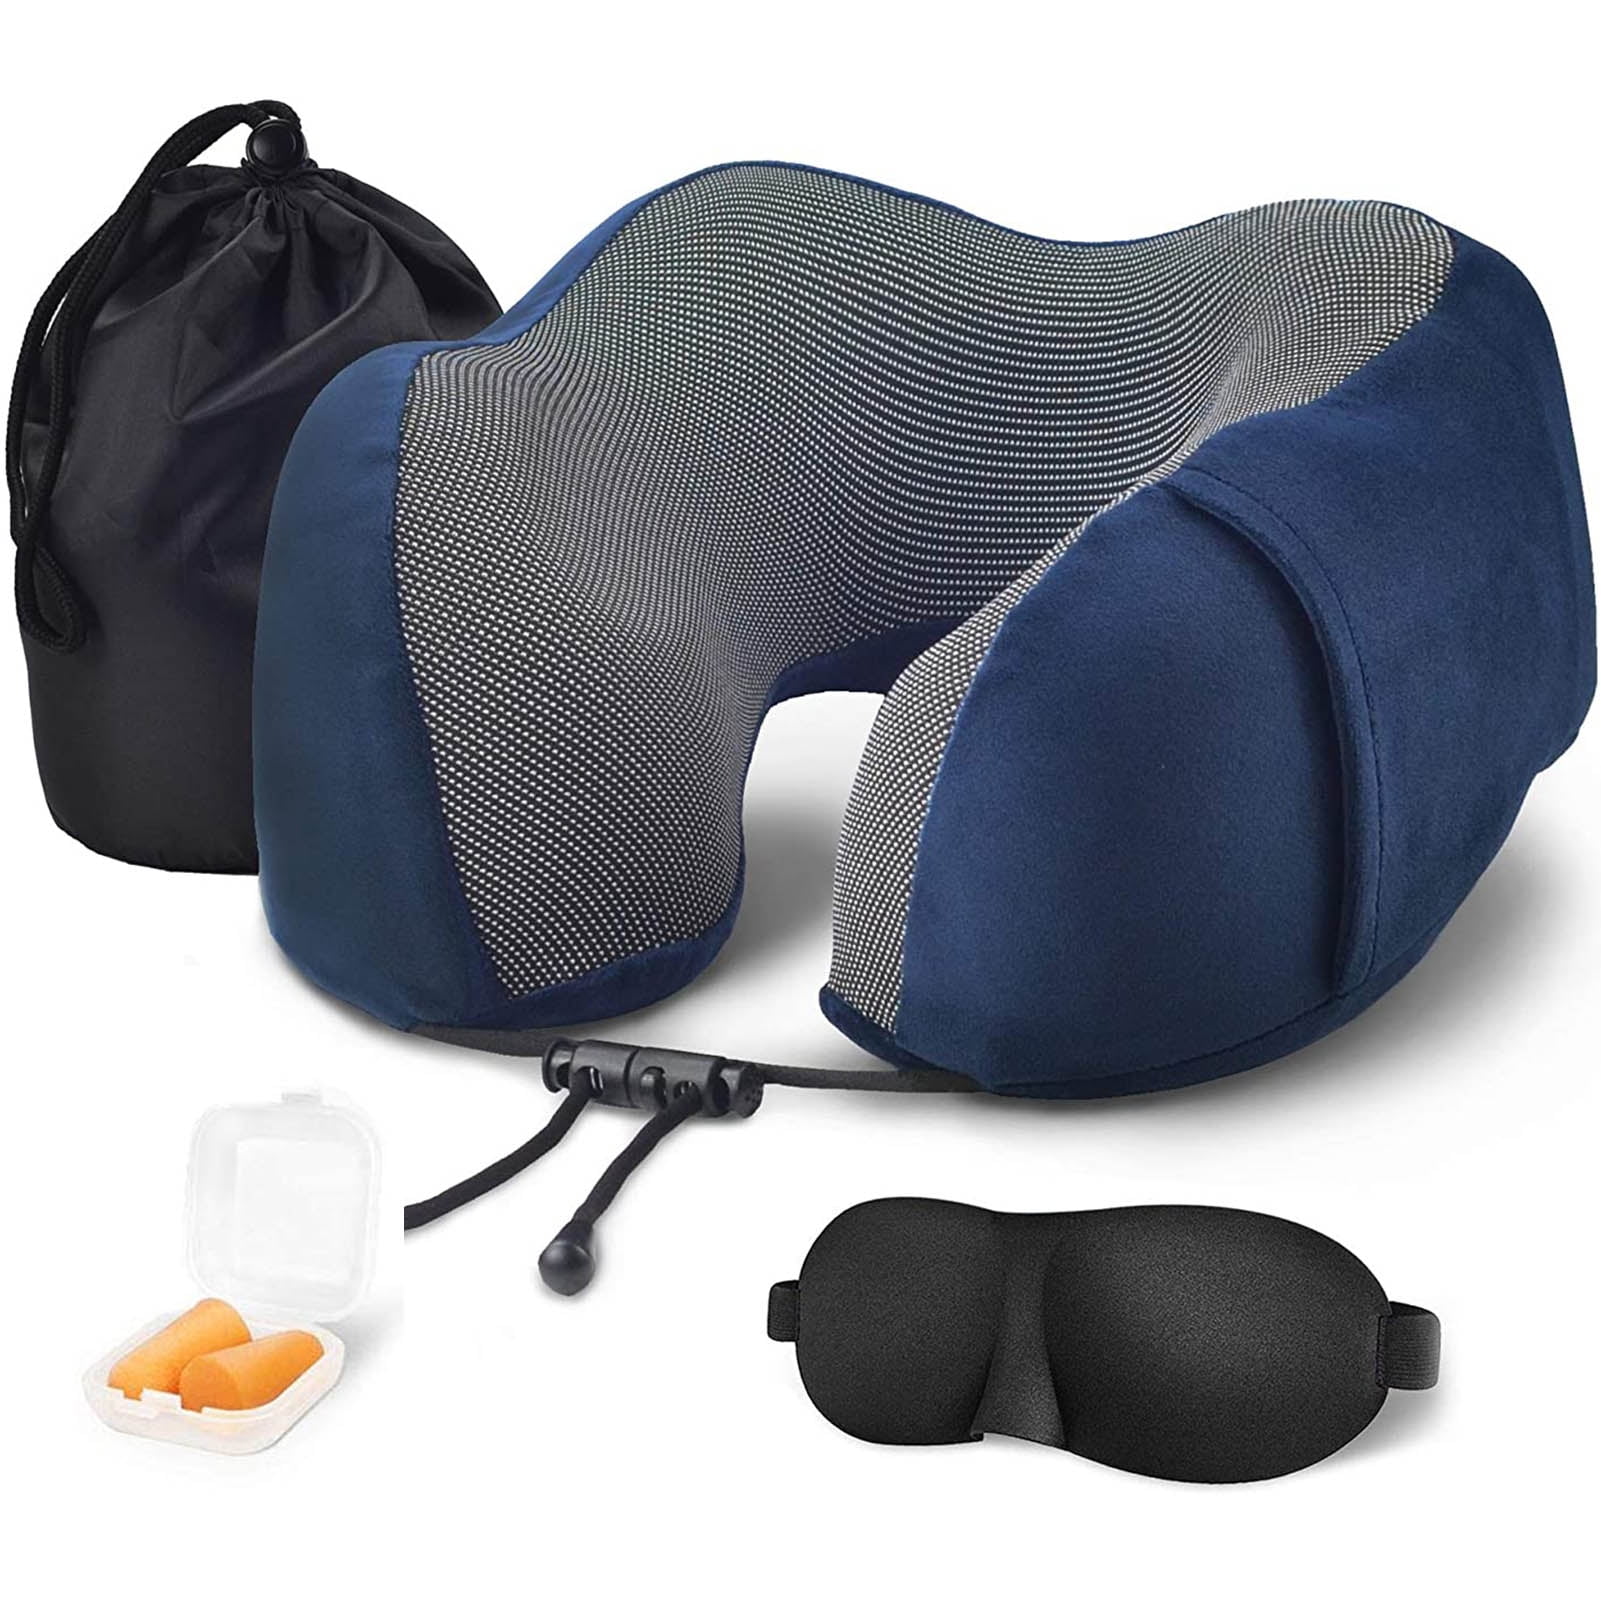 Portable Travel Pillow Cushion Inflatable Comfortable Business Trip Rest 